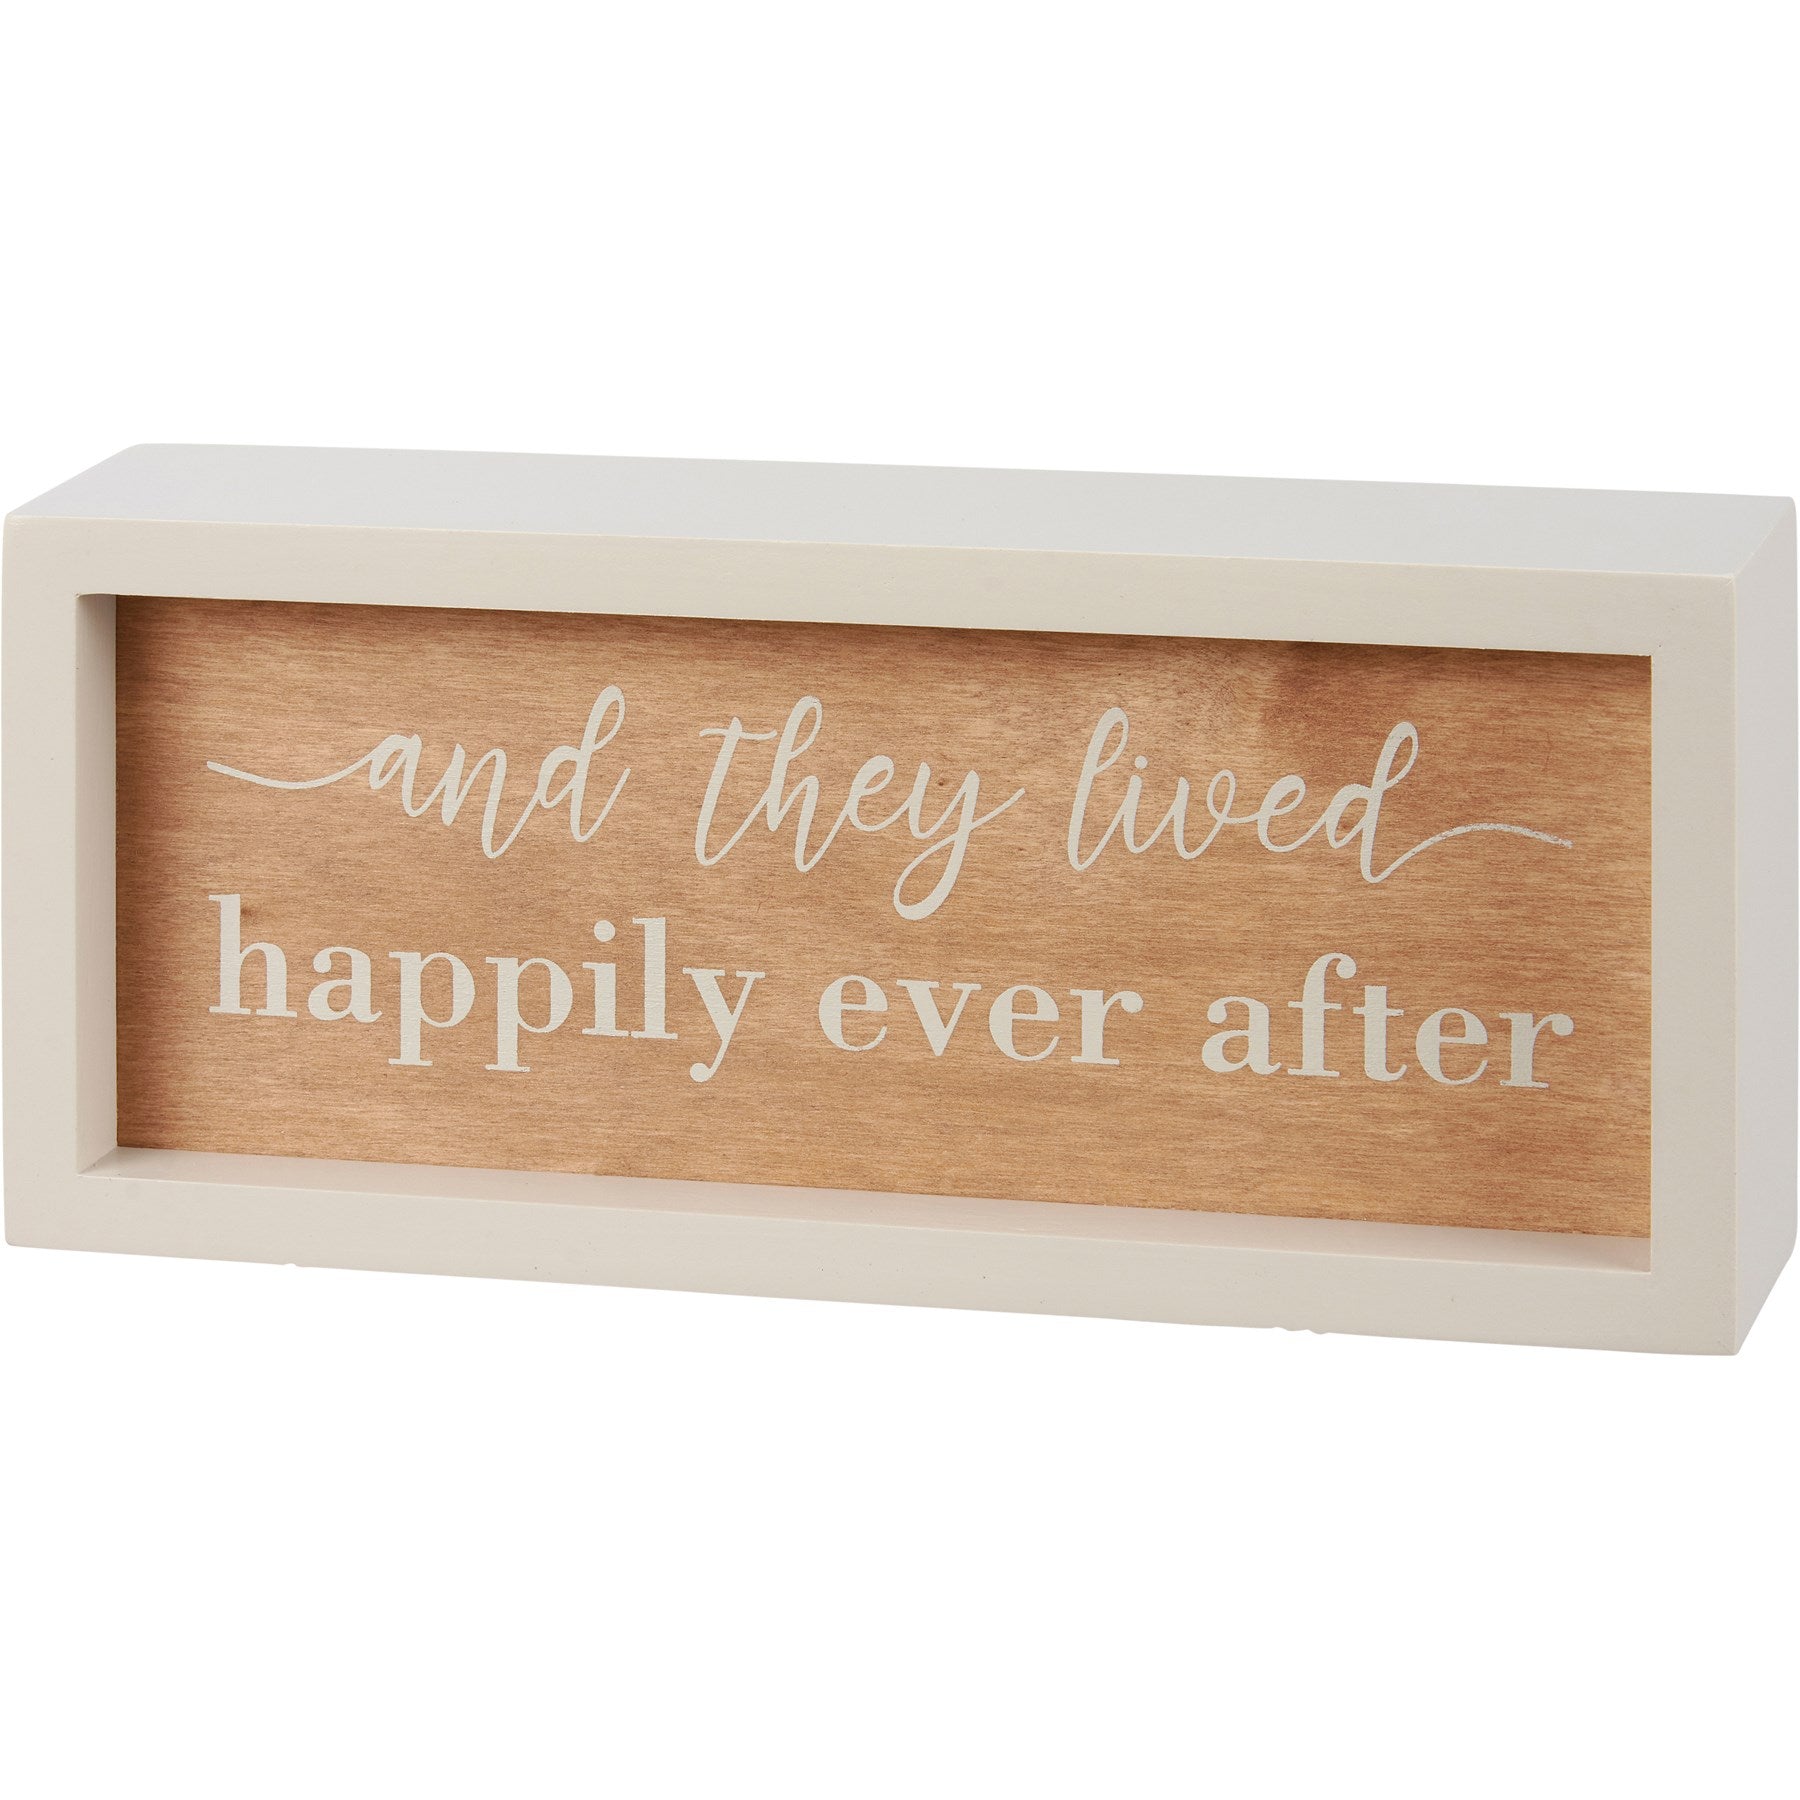 Inset Box Sign - Ever After